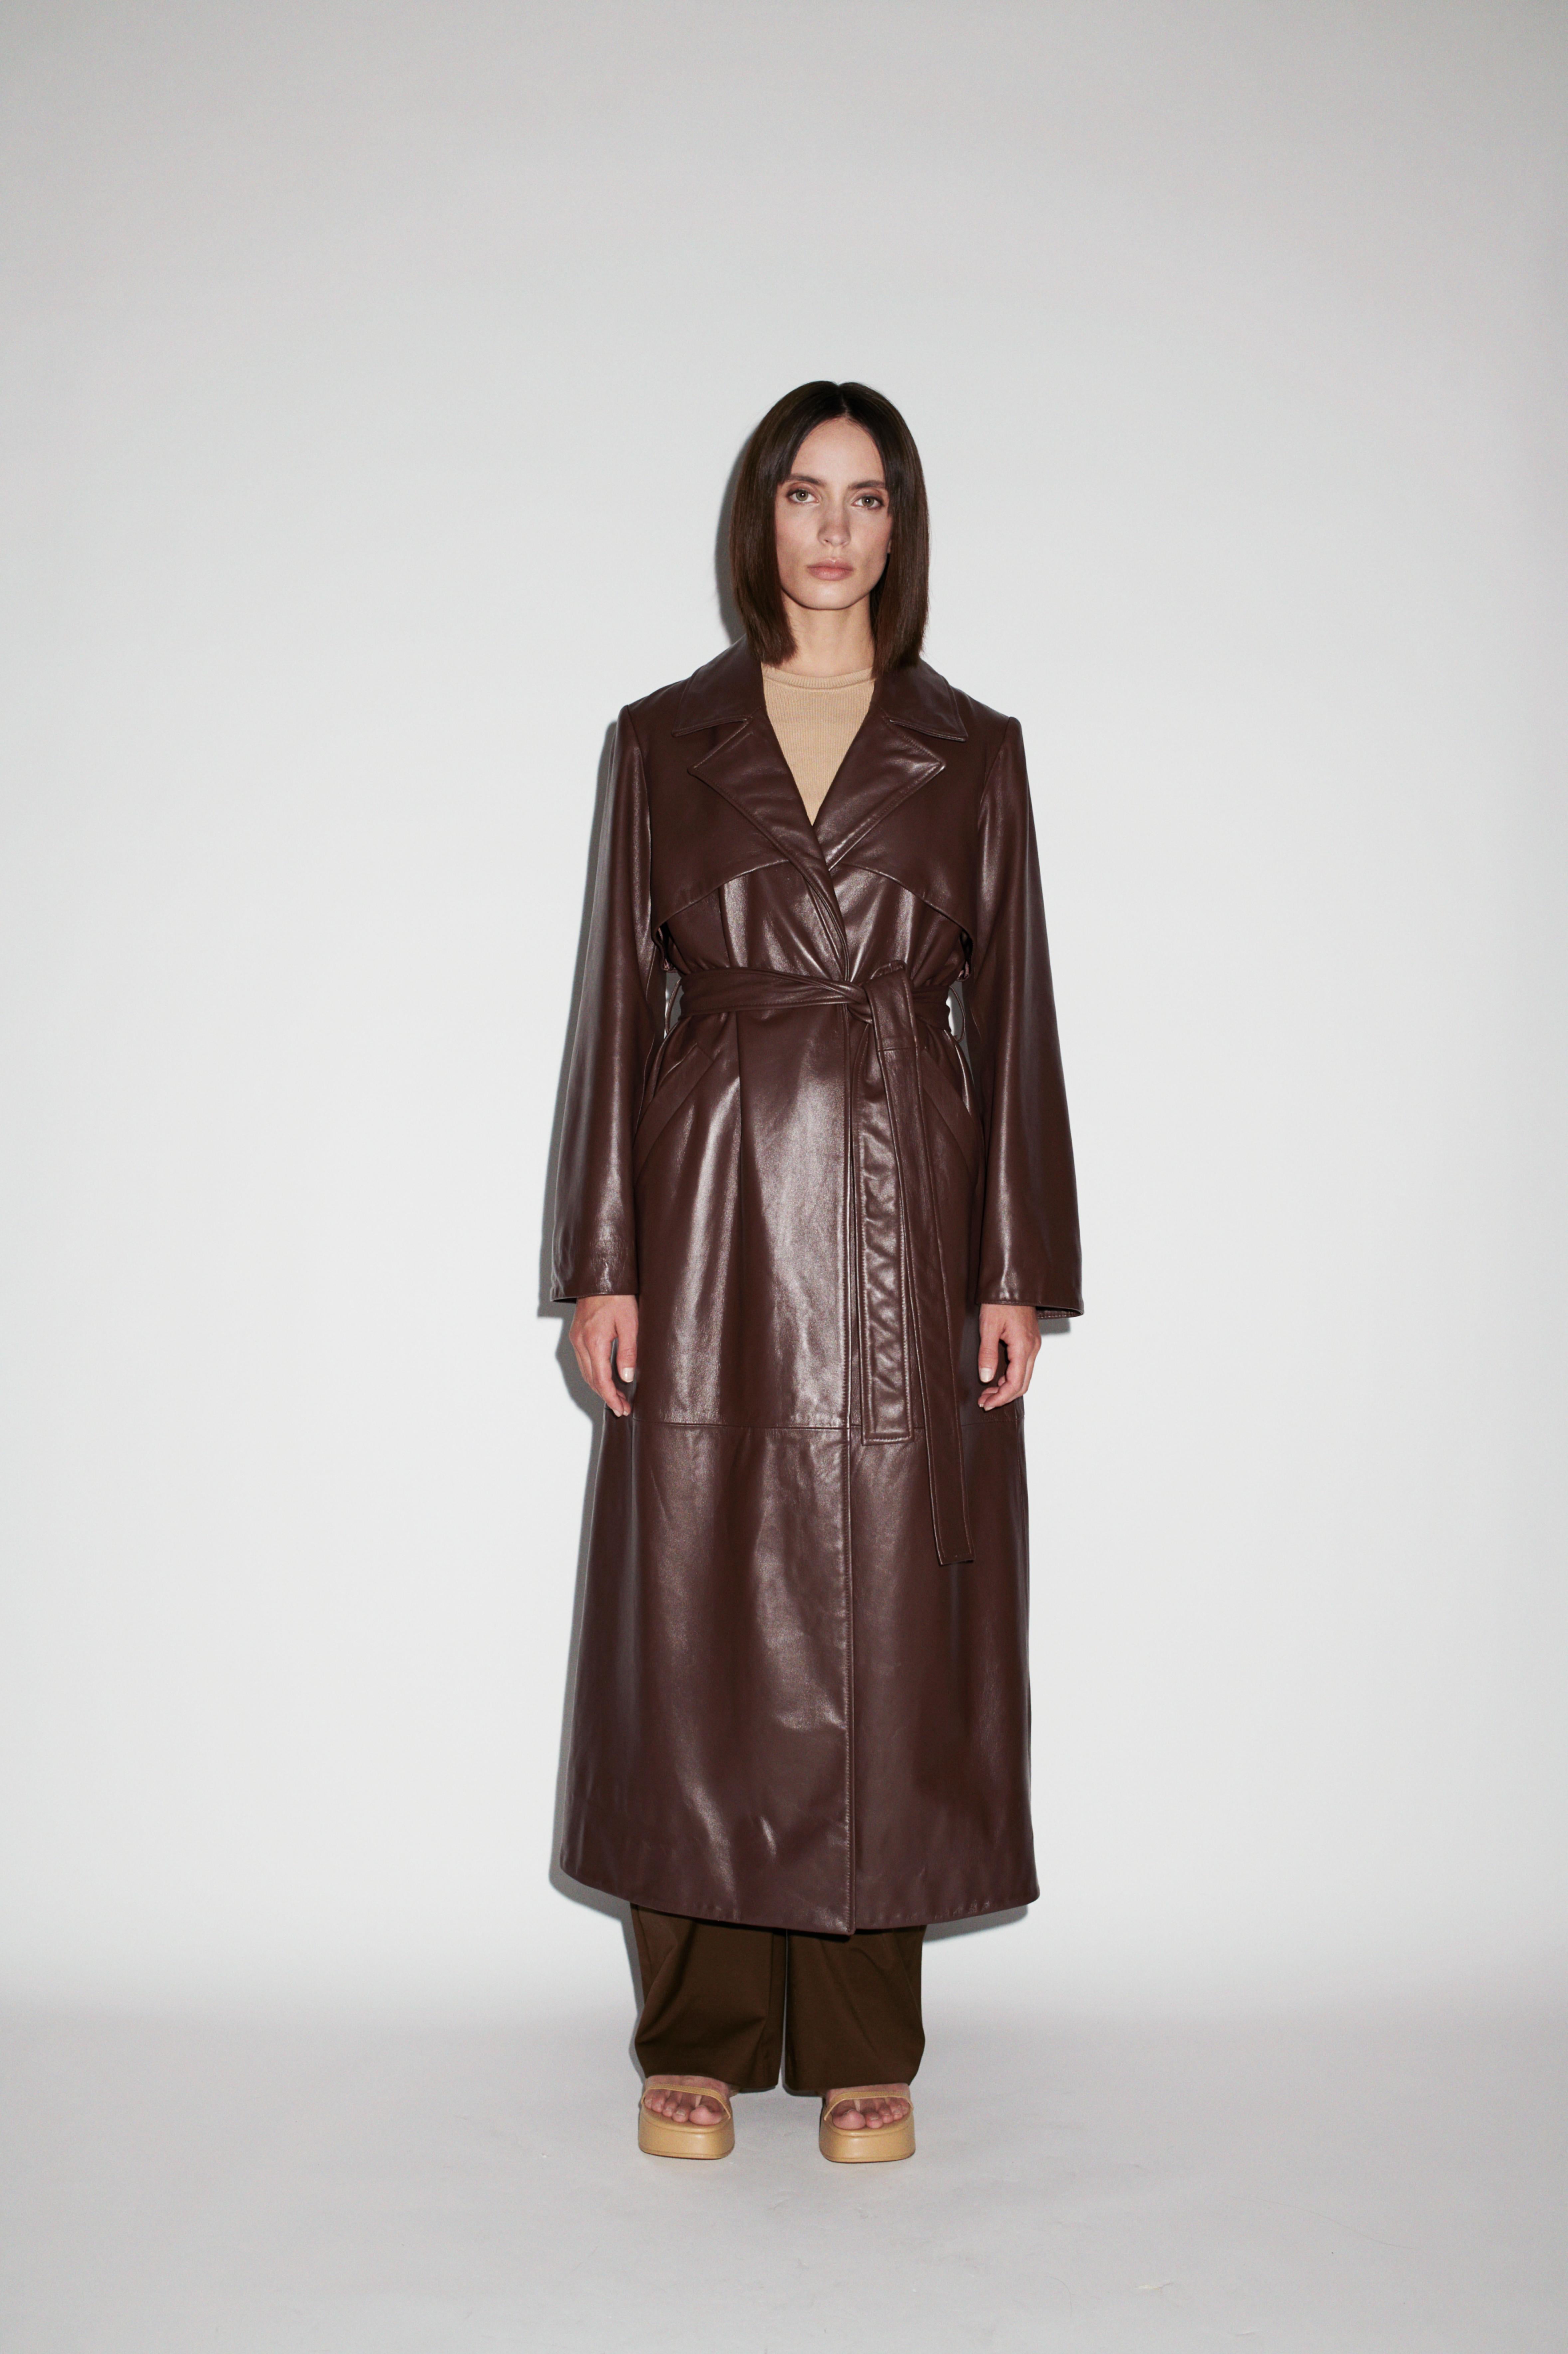 Verheyen London Leather Trench Coat in Chocolate Brown - Size uk 12

Handmade in London, made with 100% Italian Lambs Leather this luxury item is an investment piece to wear for a lifetime.  This piece is made by artisans in London, expert artisans